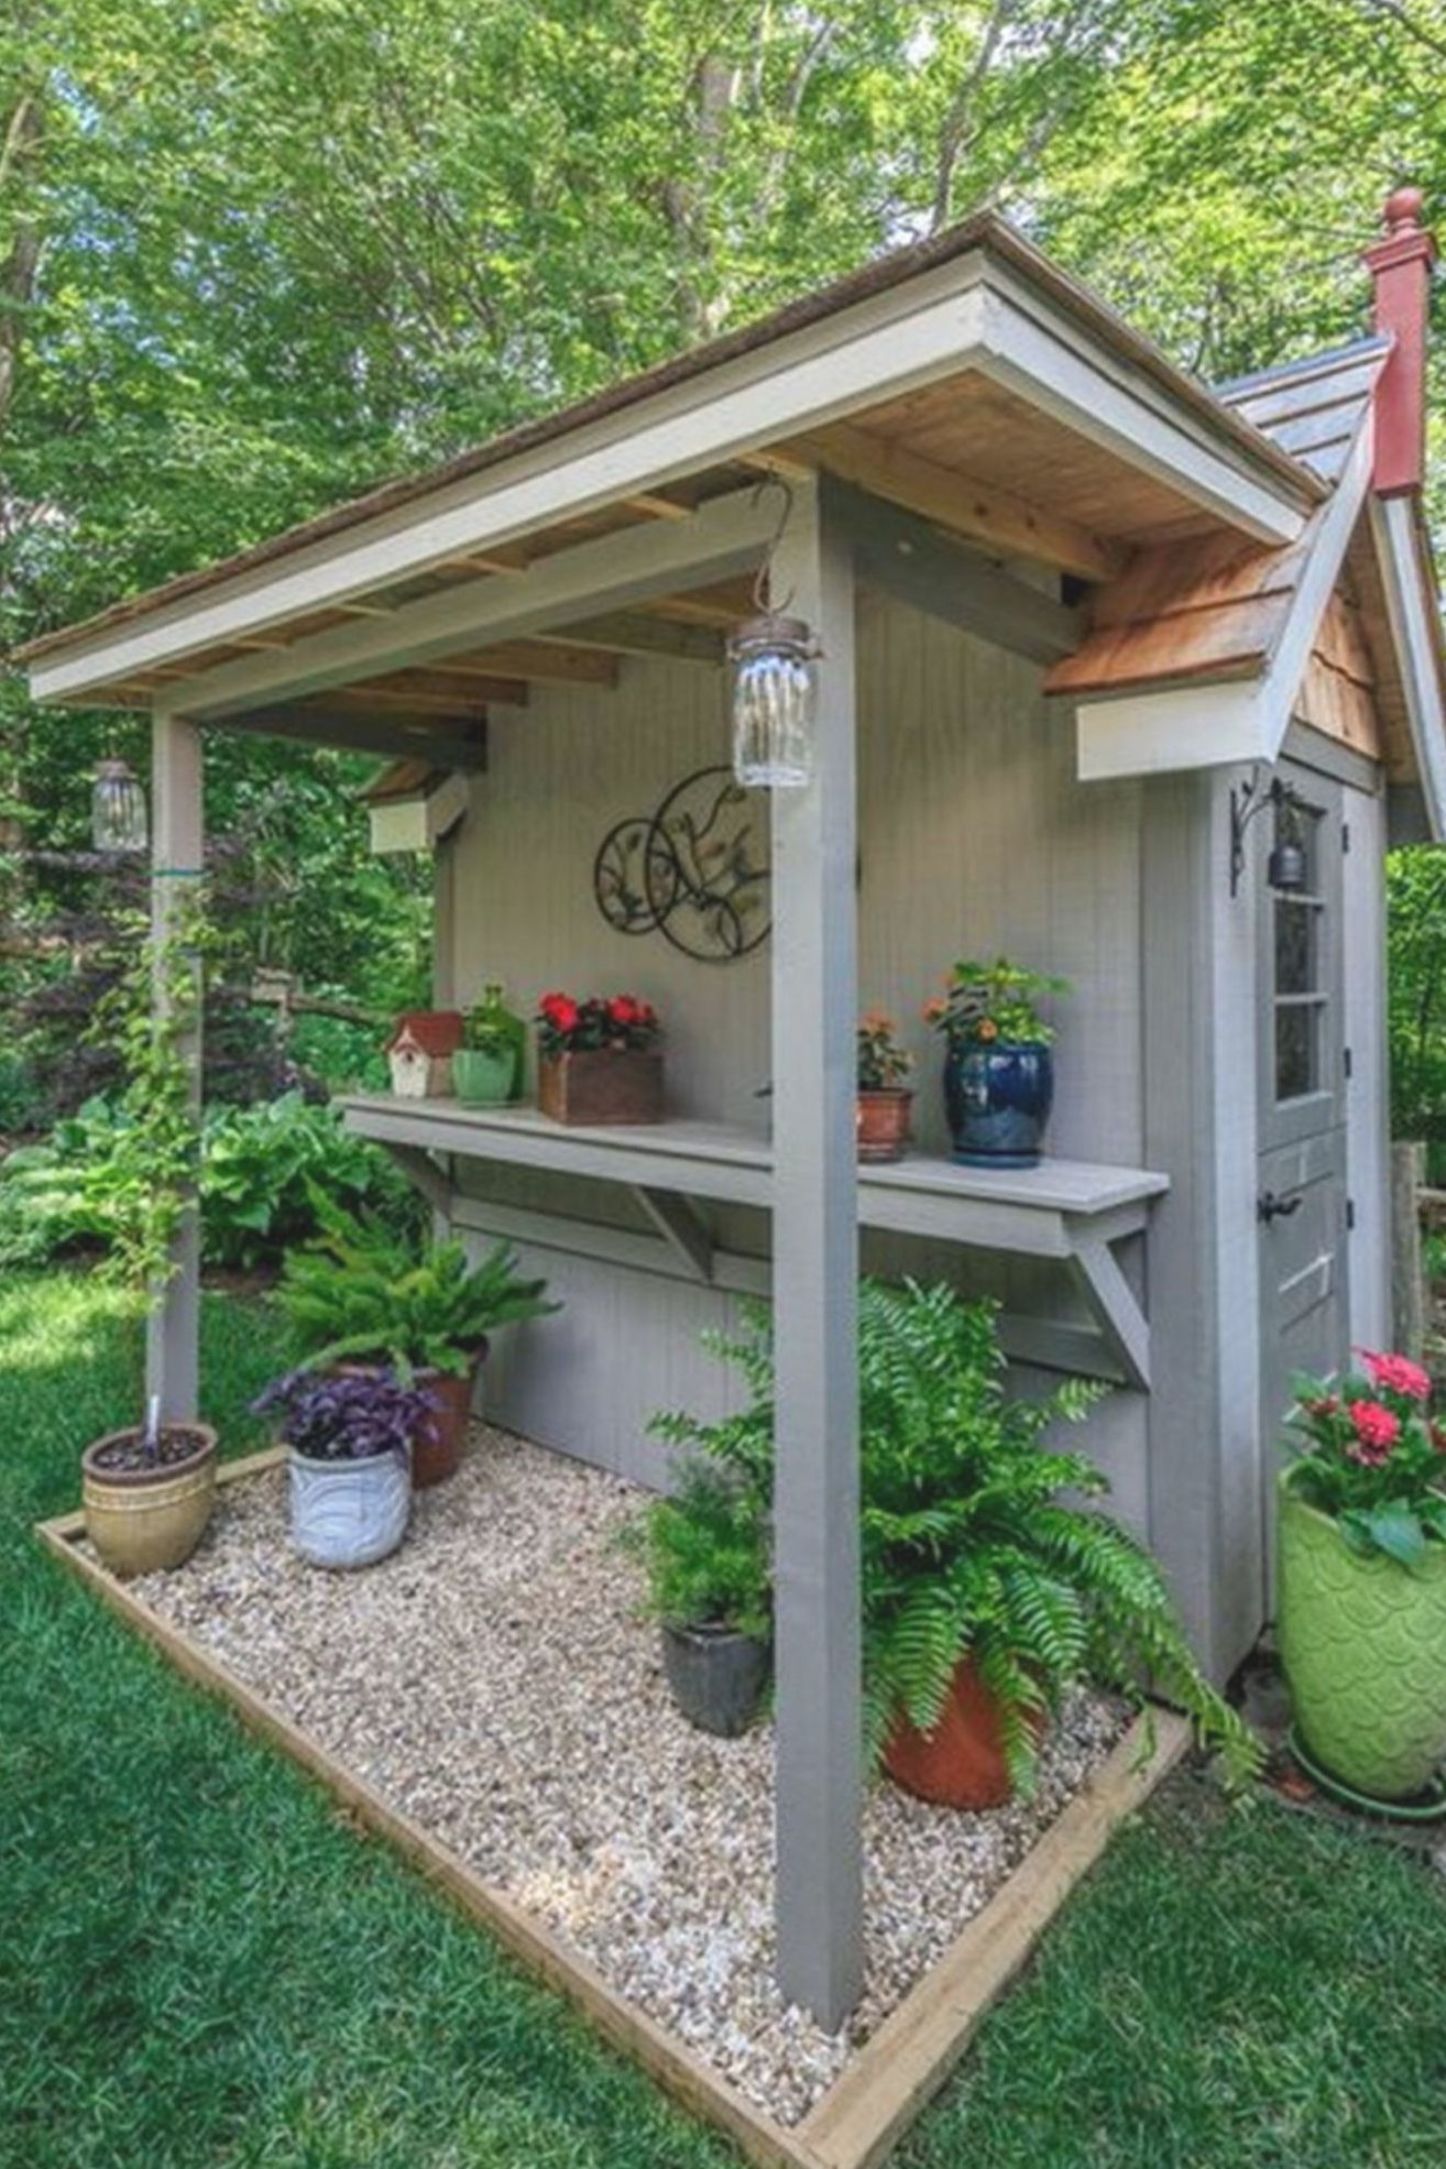 The Charming Tiny Garden shed